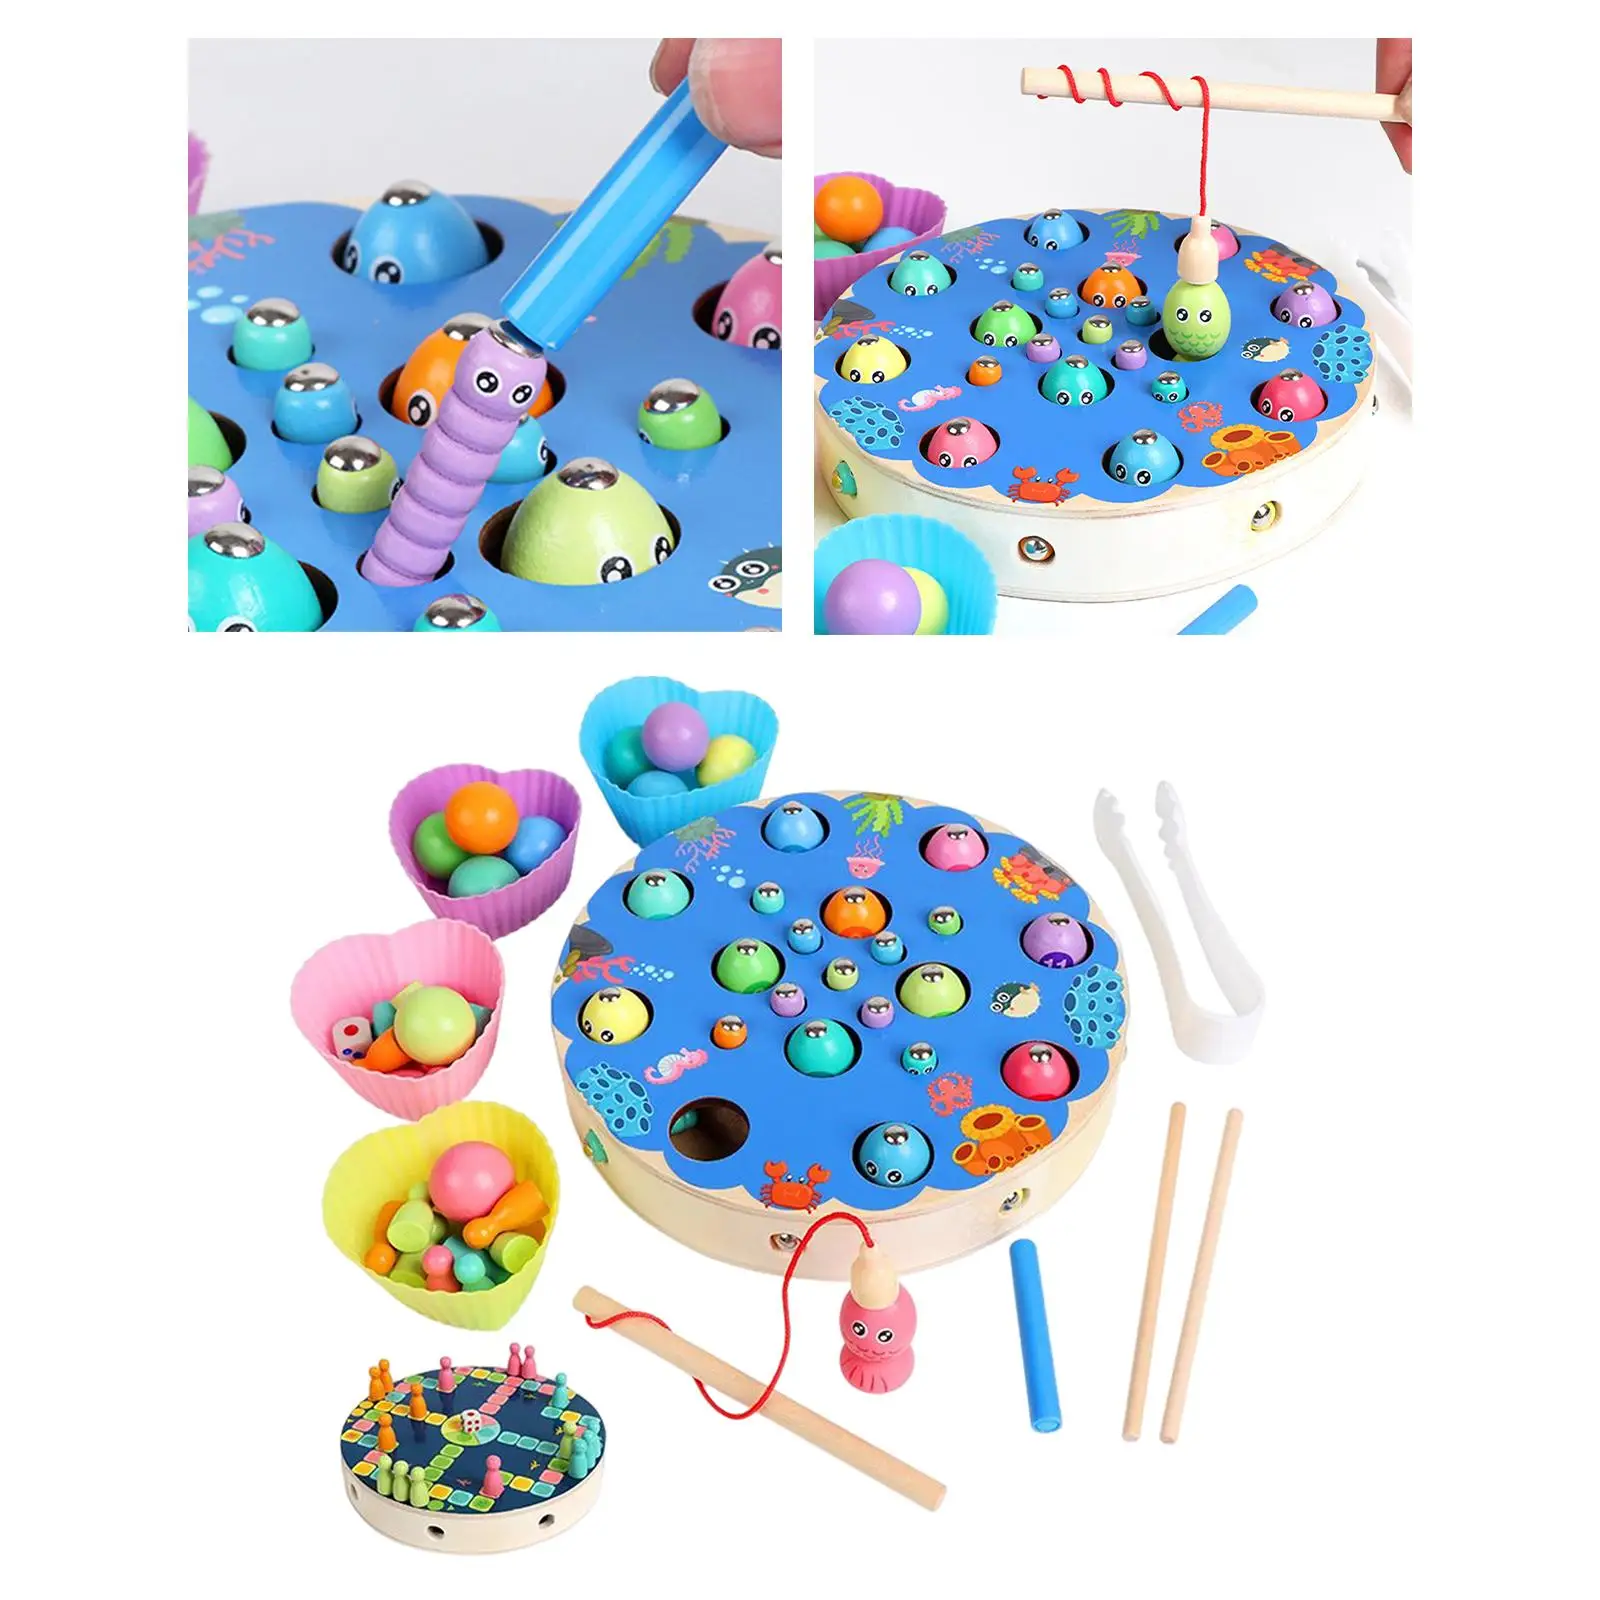 Wooden Fishing Game with Chess Fine Motor Skill Learning Toy for Teaching Birthday